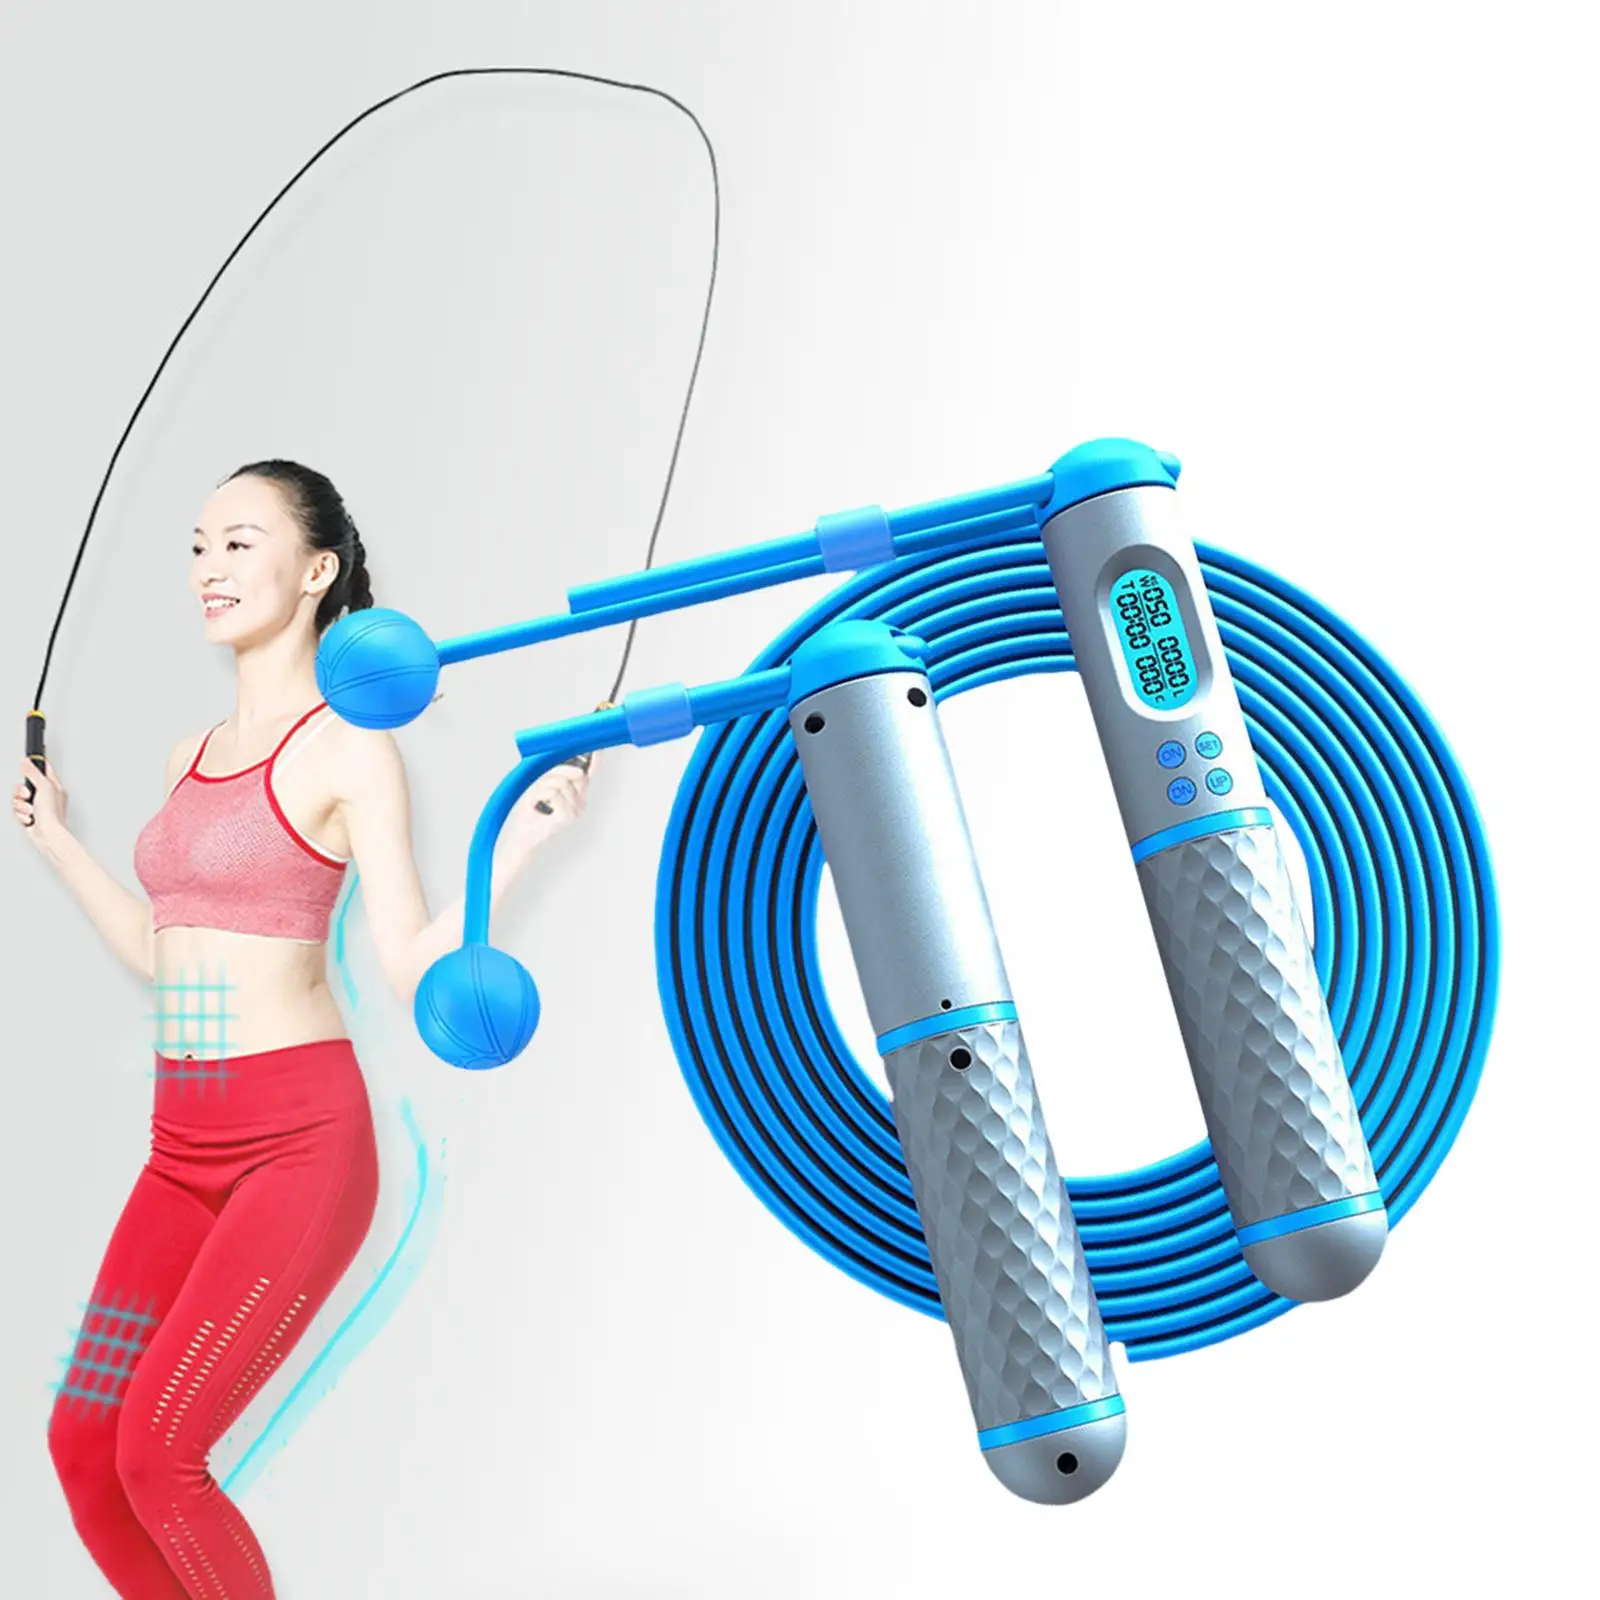 2 in 1 Skipping Rope with Counter with Adjustable Length Cordless Ball for Fitness Endurance Training Workout Exercise Women Men